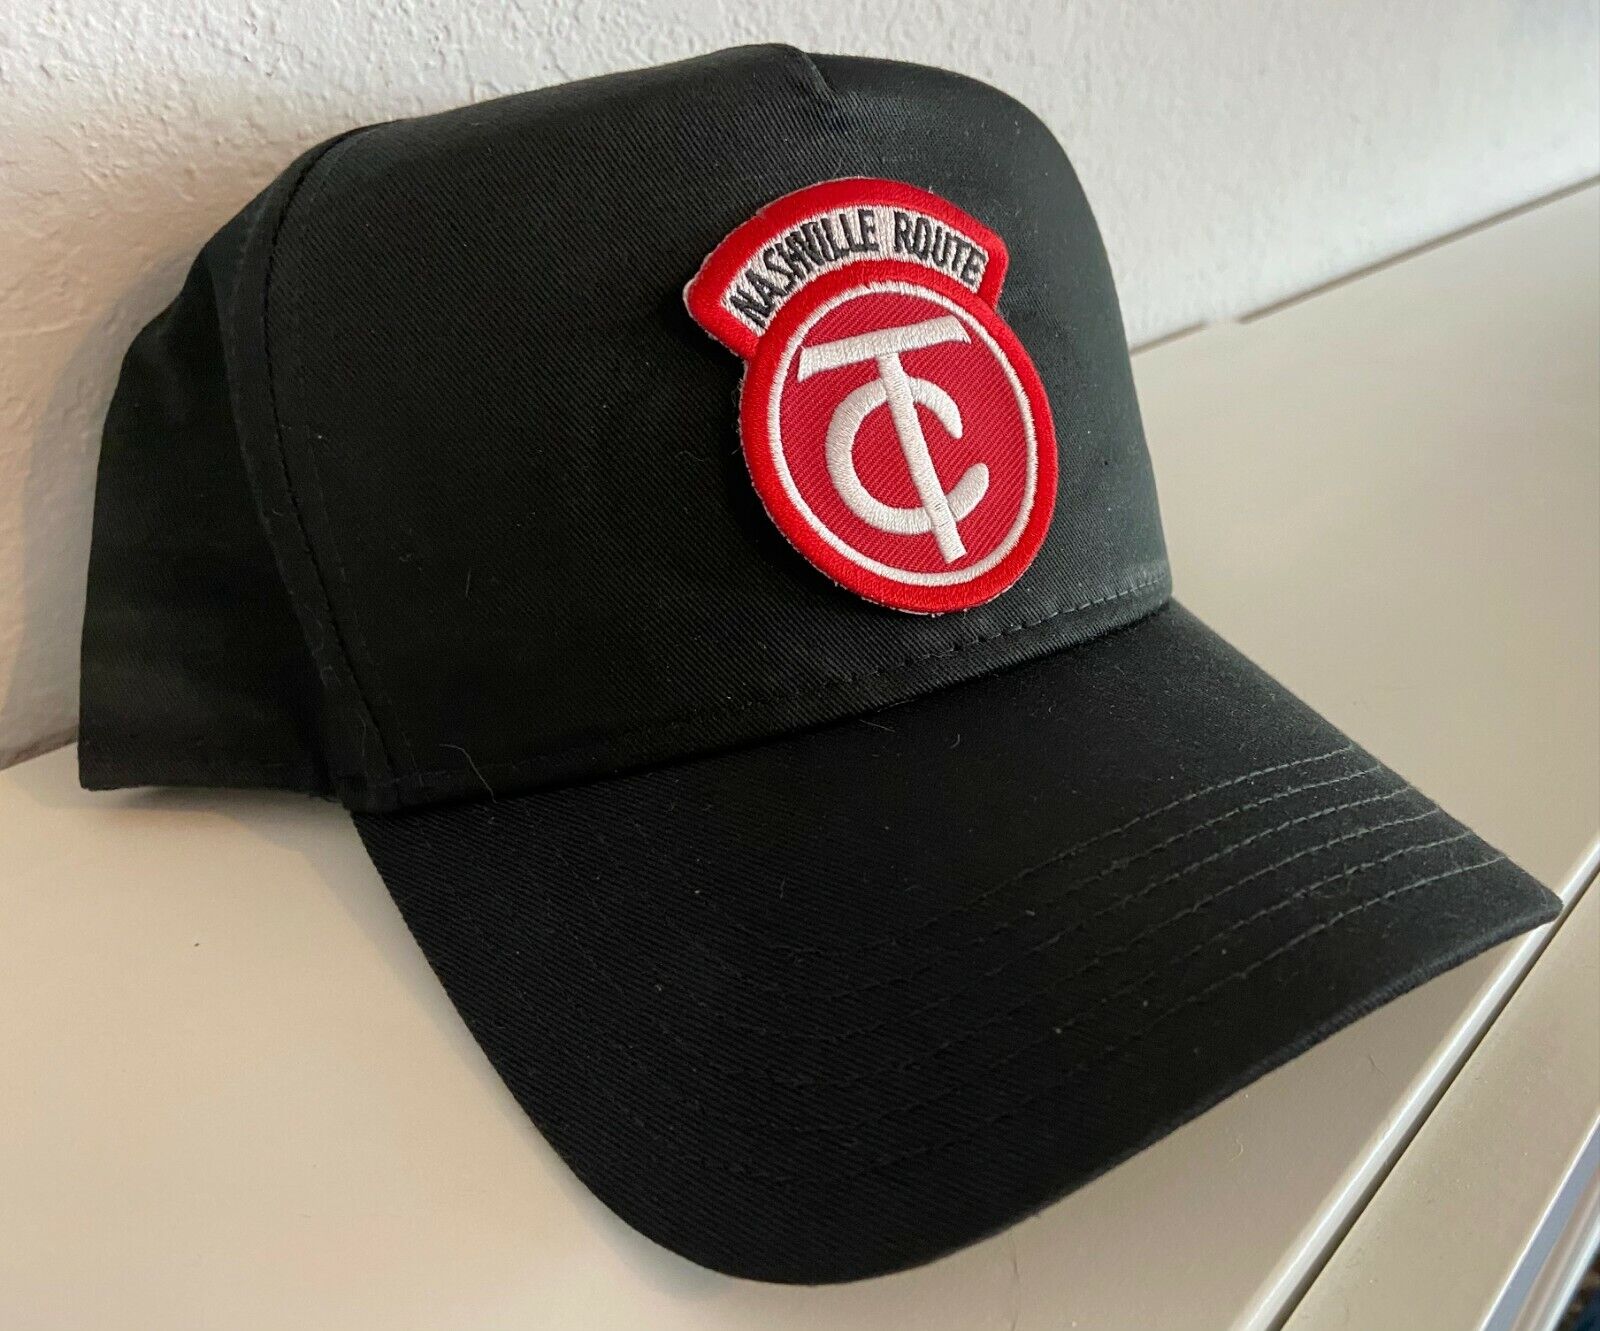 Cap / Hat  - Tennessee Central- Nashville Route (TC) #11548 - NEW